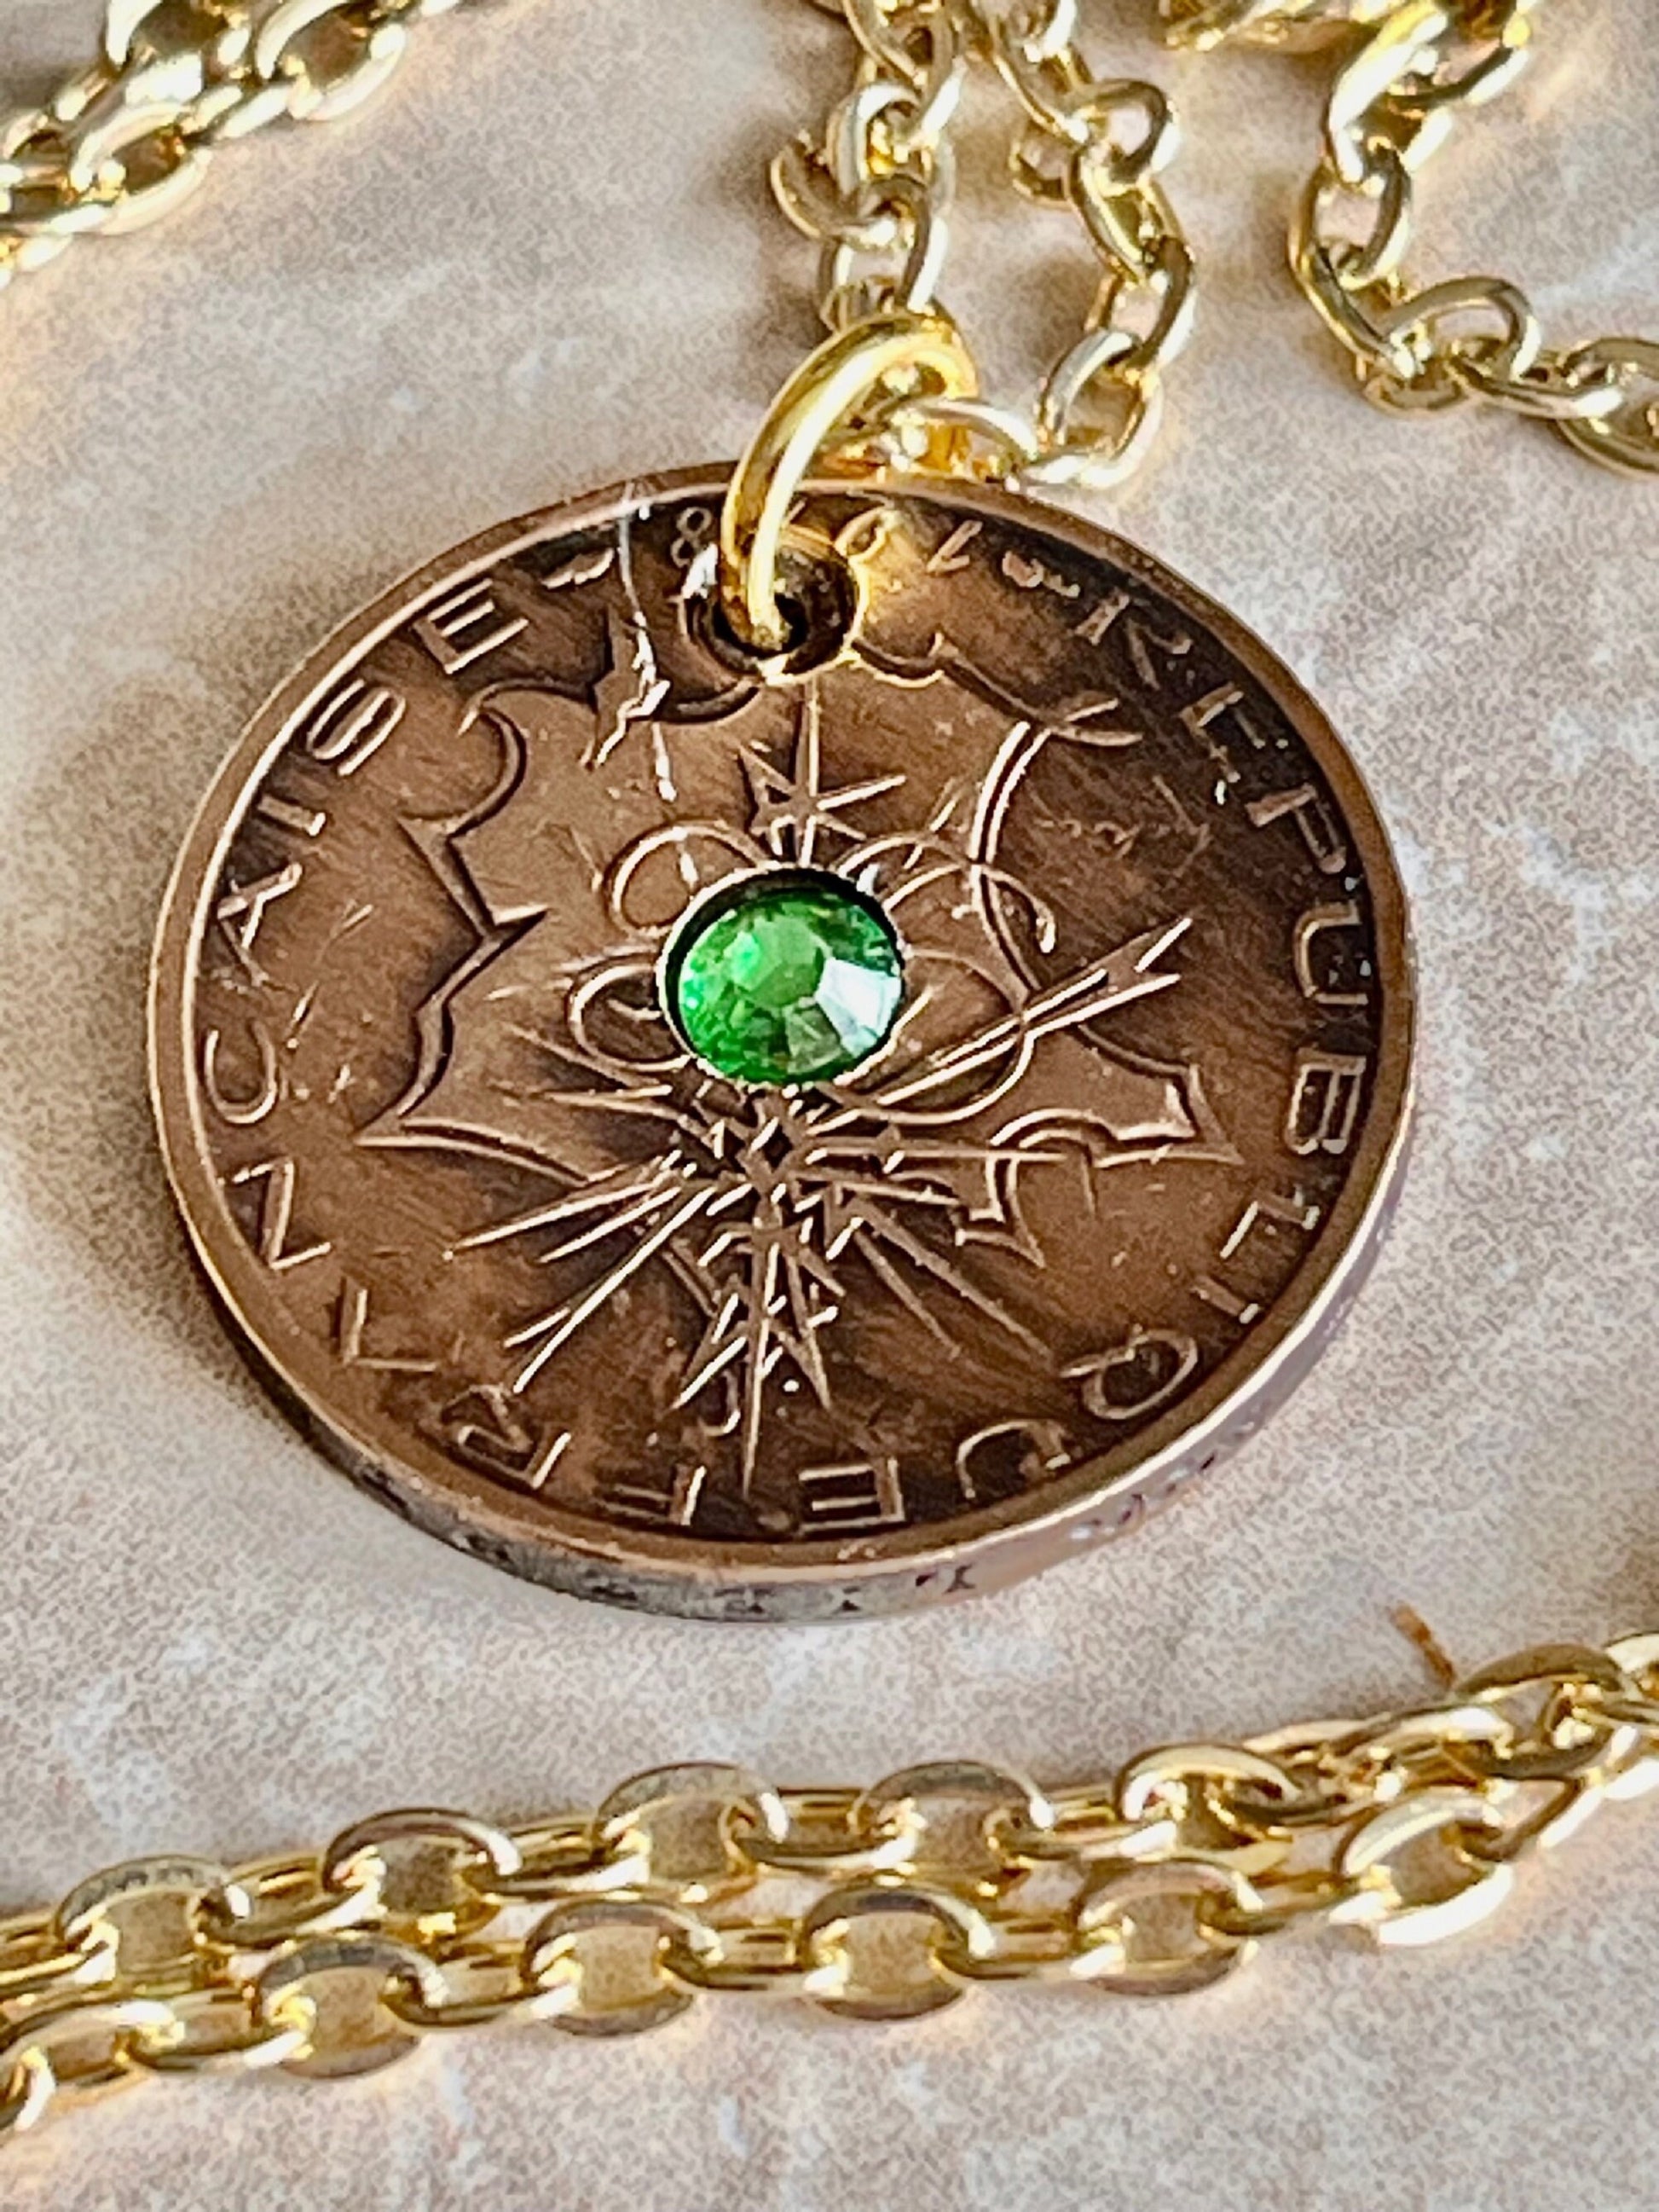 France Coin Pendant 10 Francs Necklace Handmade Custom Made Charm Gift For Friend Coin Charm Gift For Him, Her, Coin Collector, World Coins